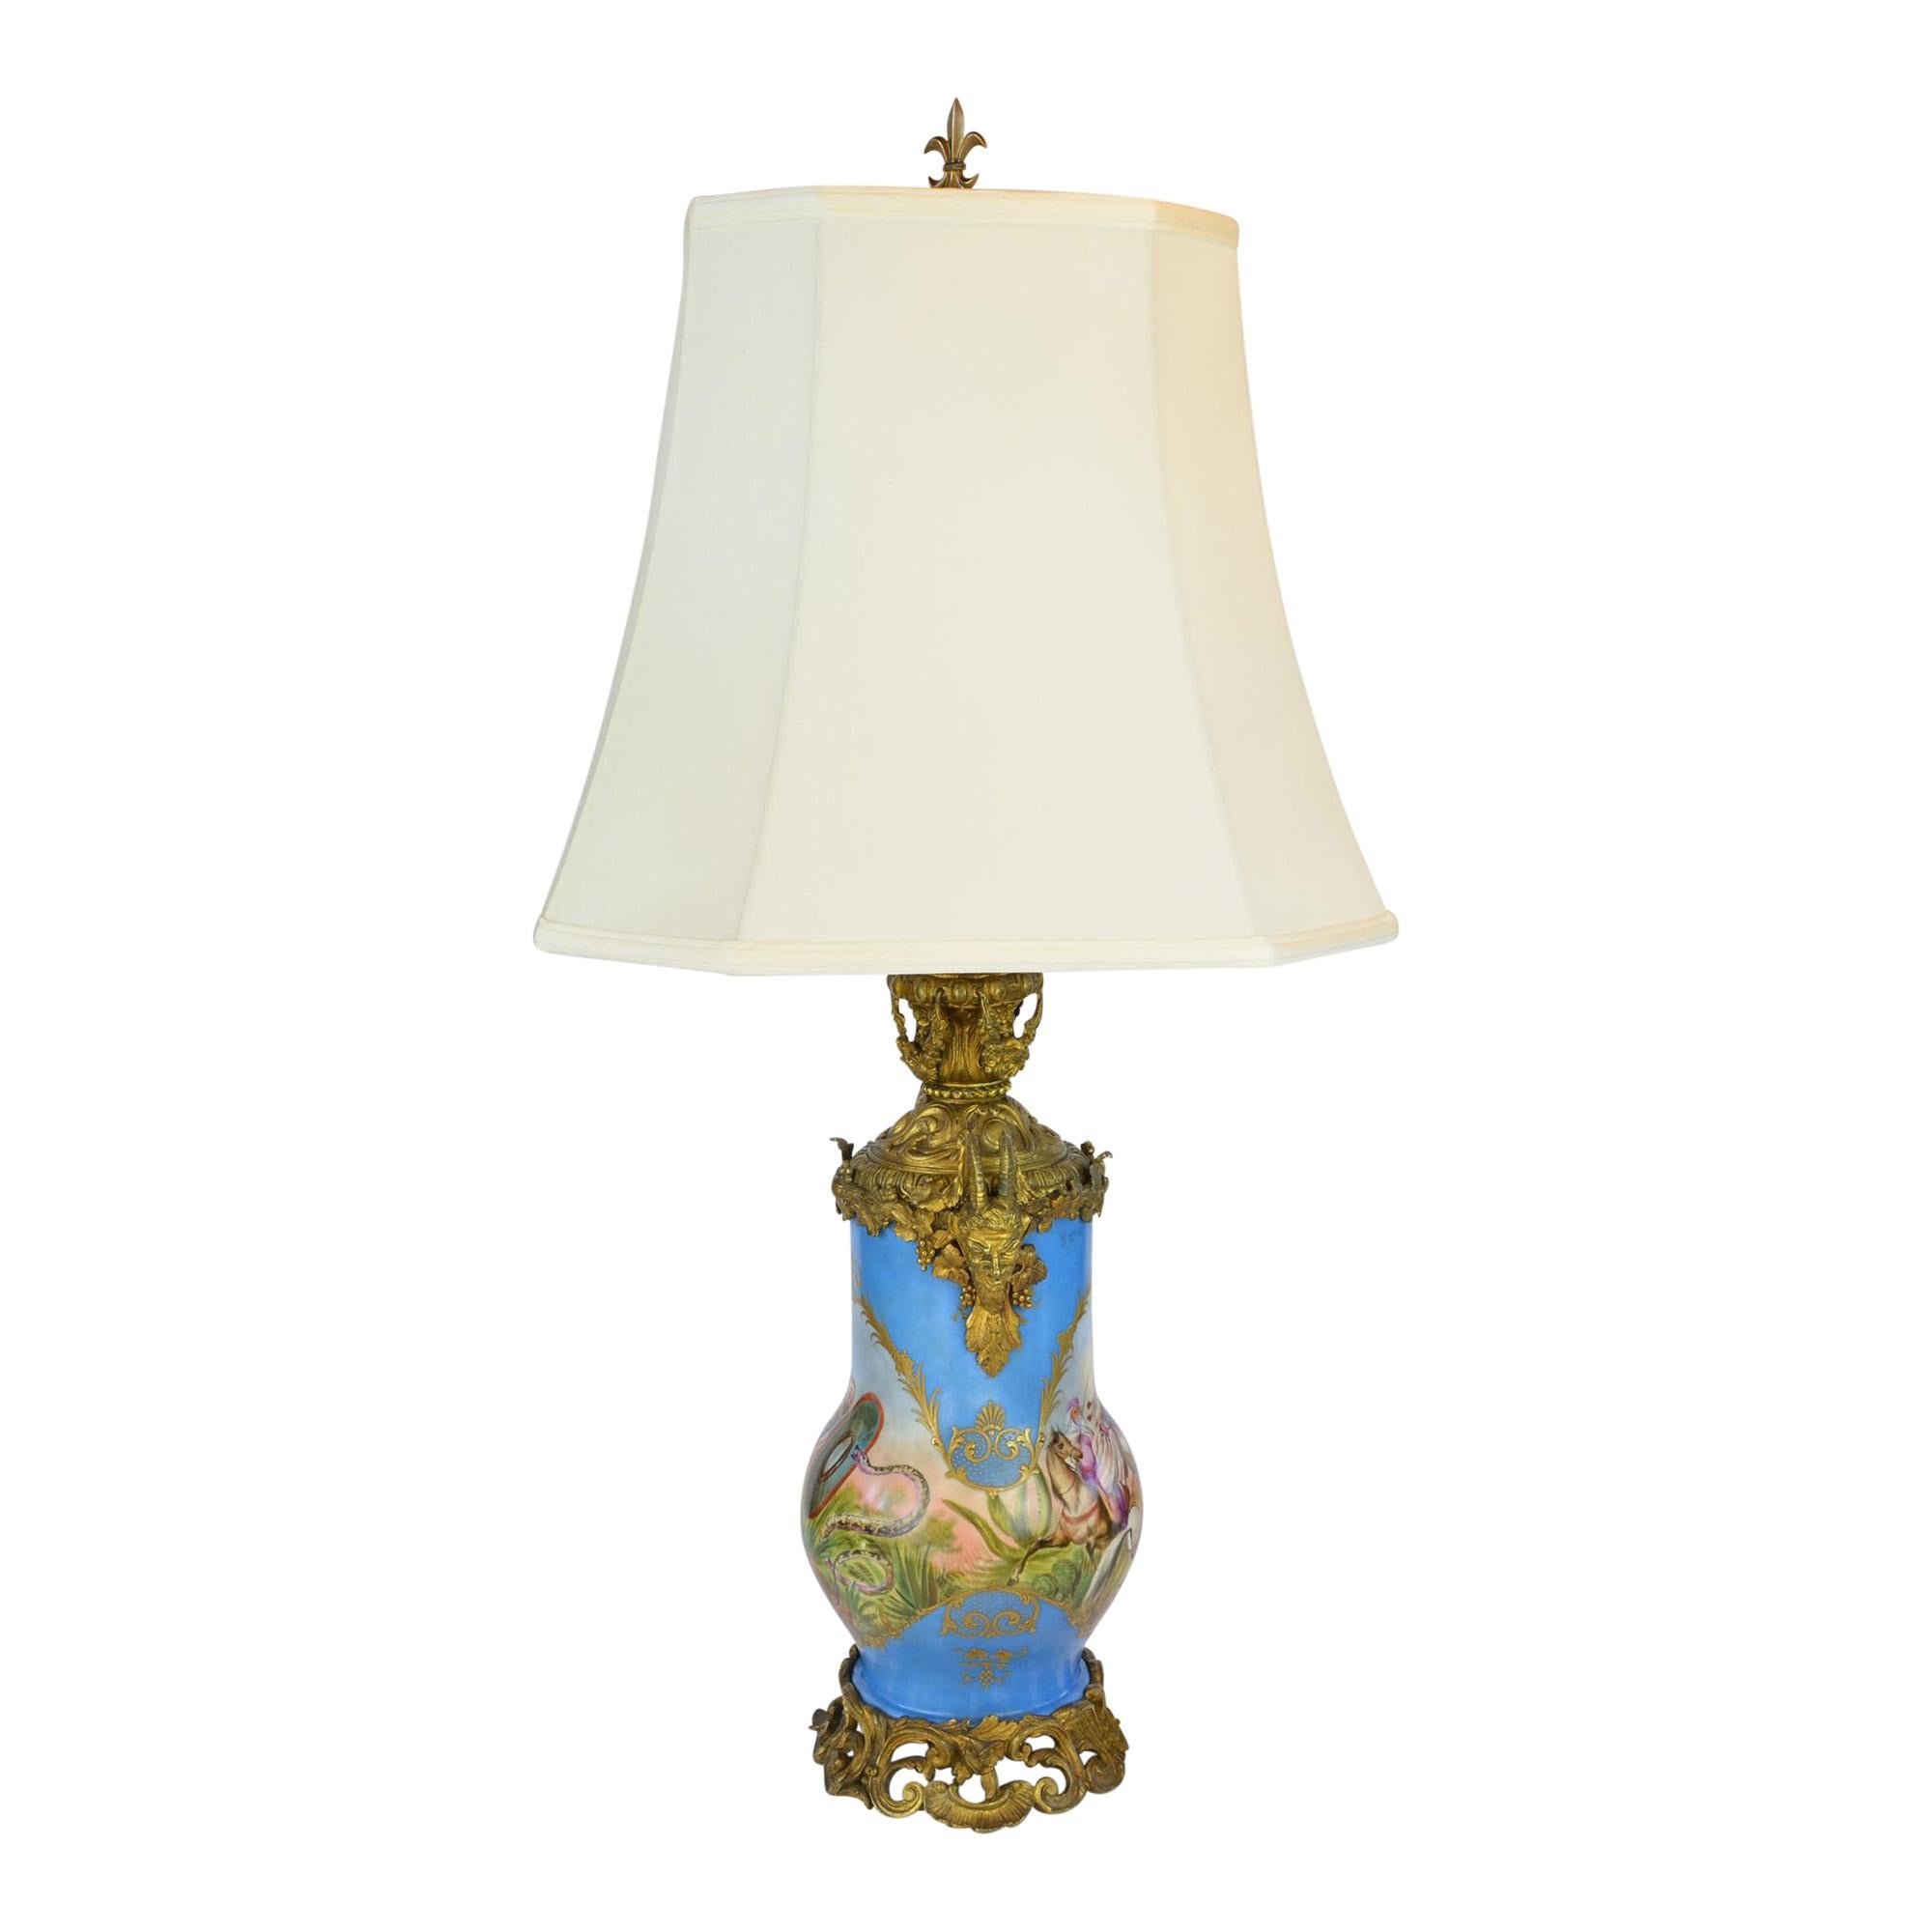 We refer to this lamp as the story lamp. The hand painted scenes show a scene of the invasion from by the Moors while the opposite side depicts a man engaged in a battle with a snake. The porcelain lamp also features unique hand heavily detailed